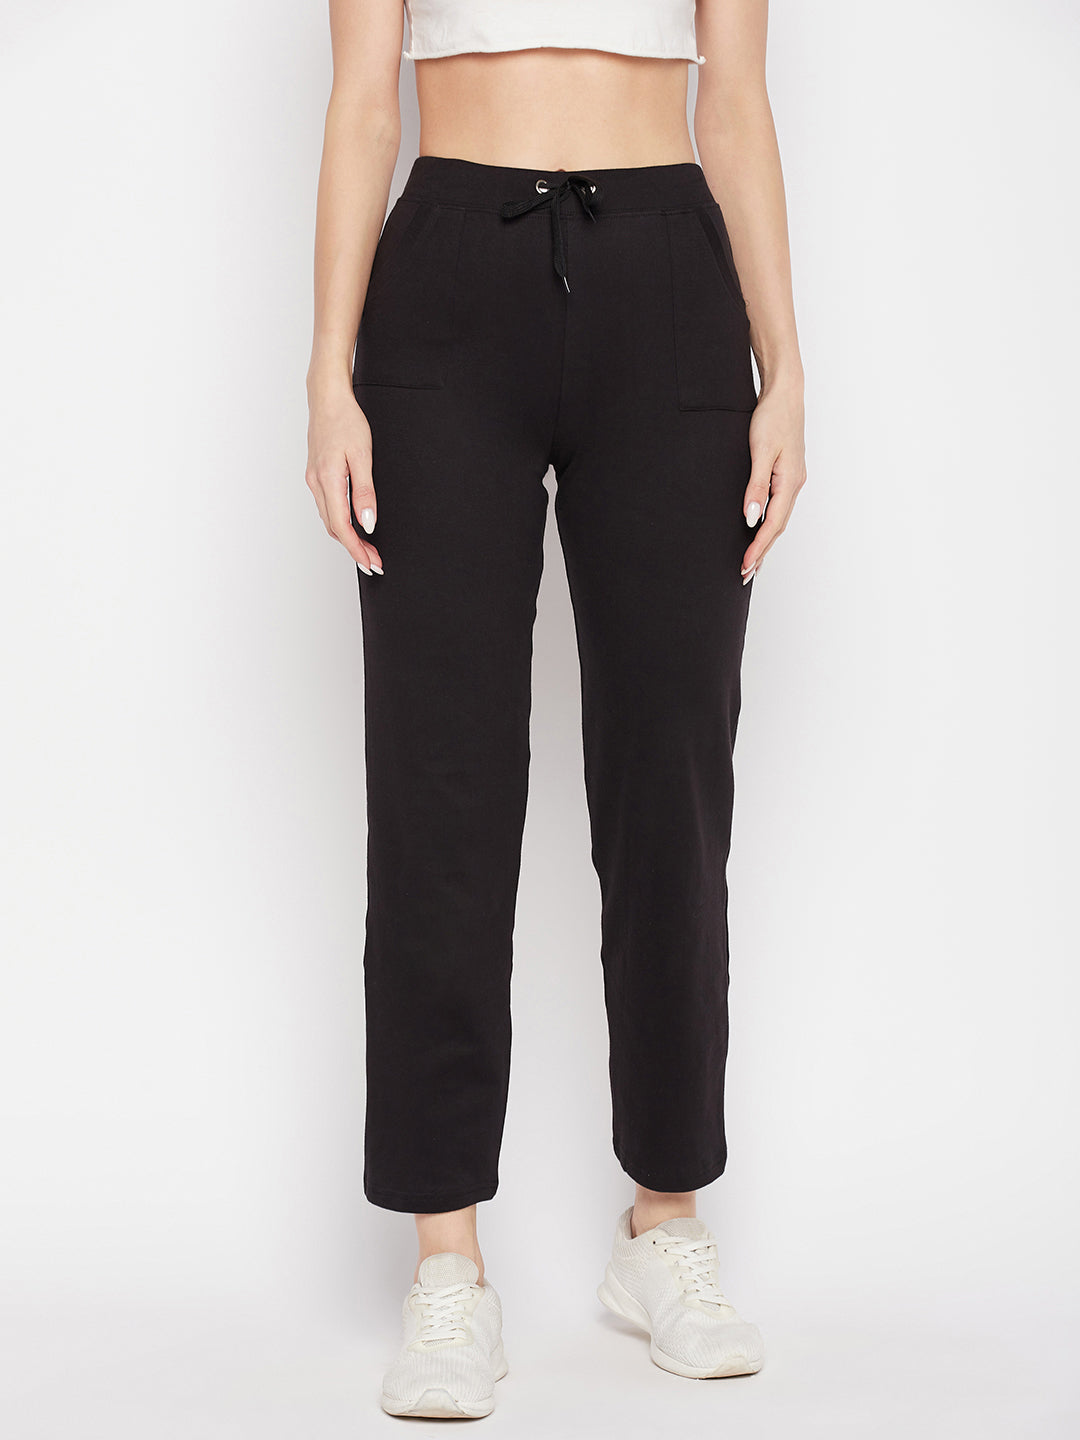 Clora Black Solid Mid Rise Cotton Trackpants